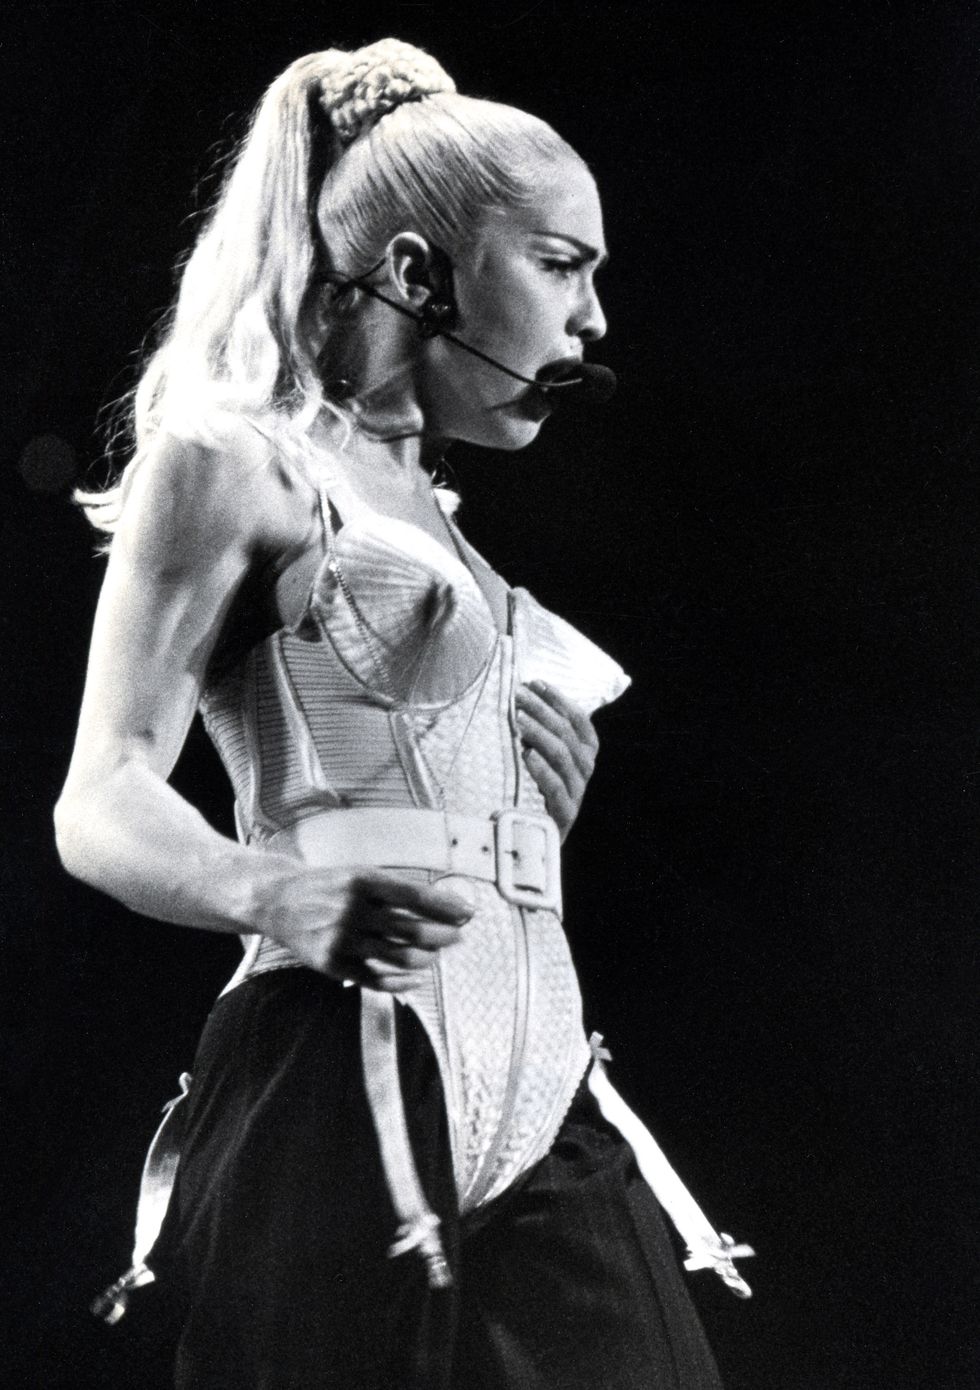 Madonna's 'Blonde Ambition' Concert Tour - May 11, 1990